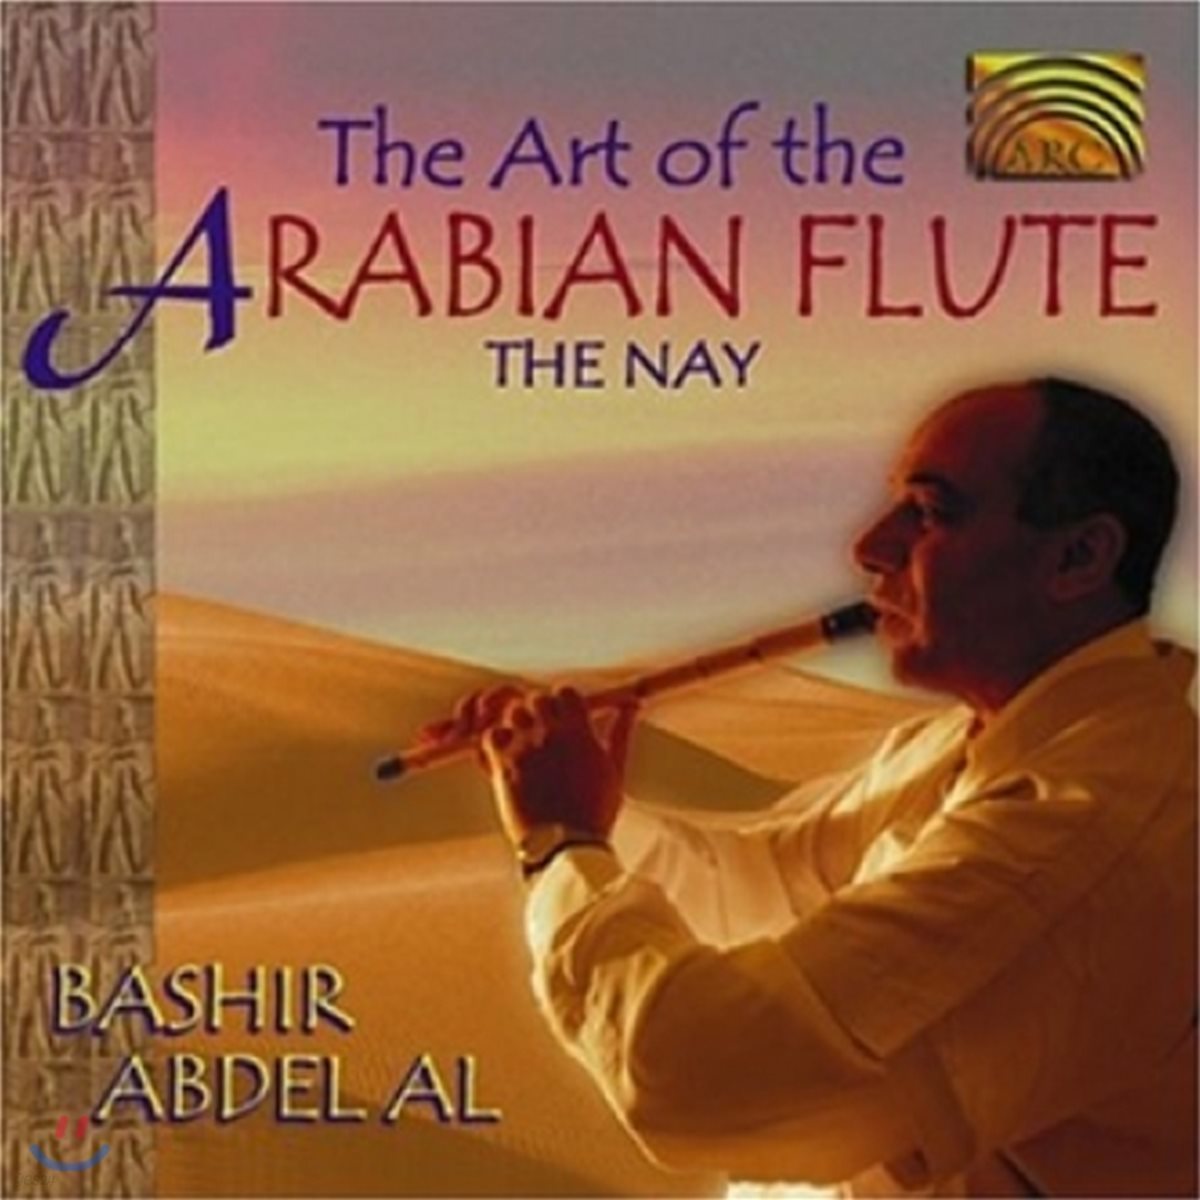 Bashir Abdel 'Aal - The Art Of The Arabian Flute: The Nay